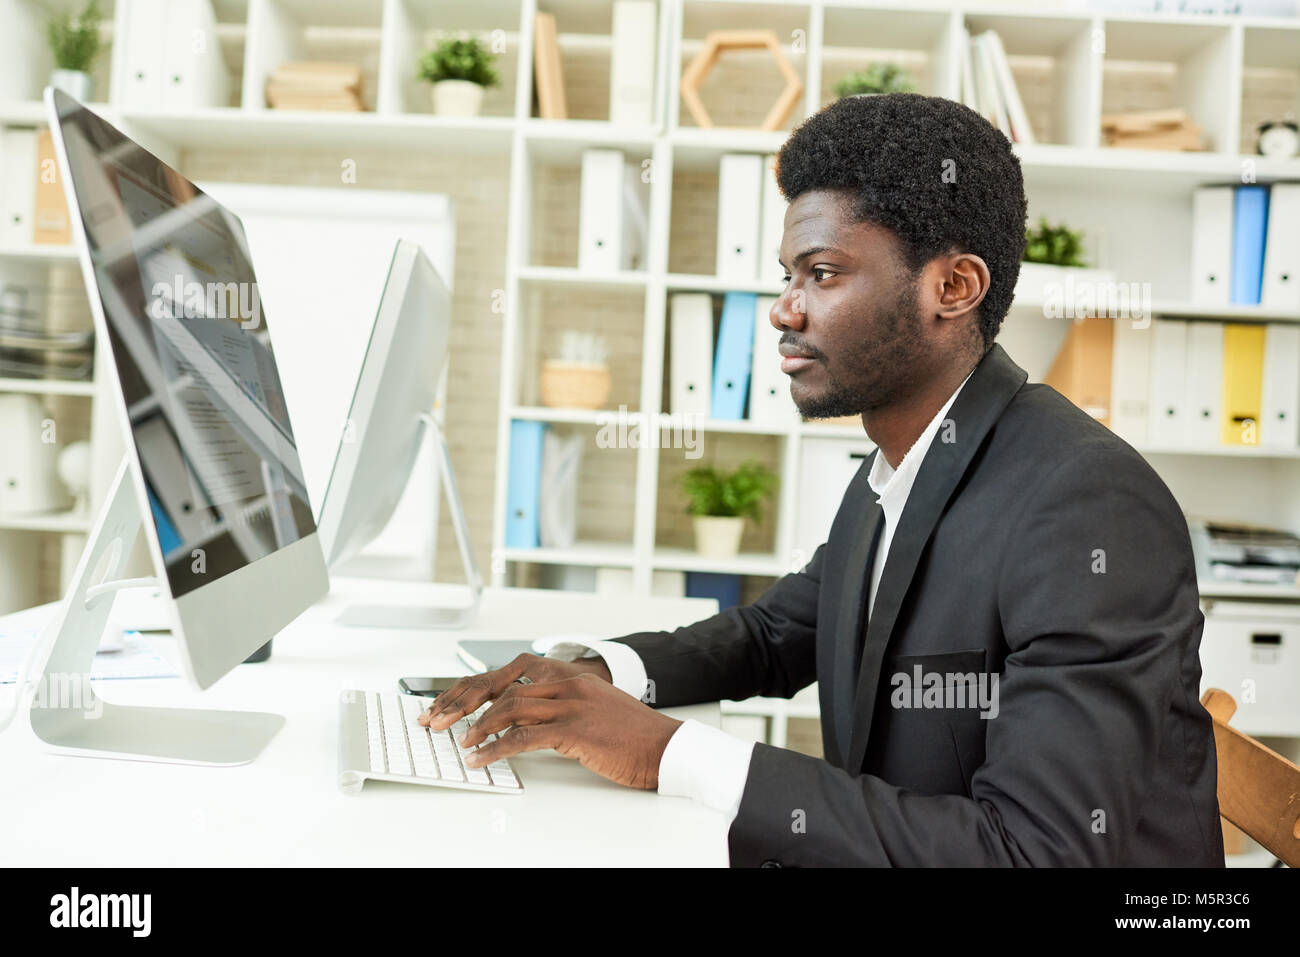 Profile view of confident African American manager sitting at desk and working on promising project with help of computer, interior of modern office o Stock Photo